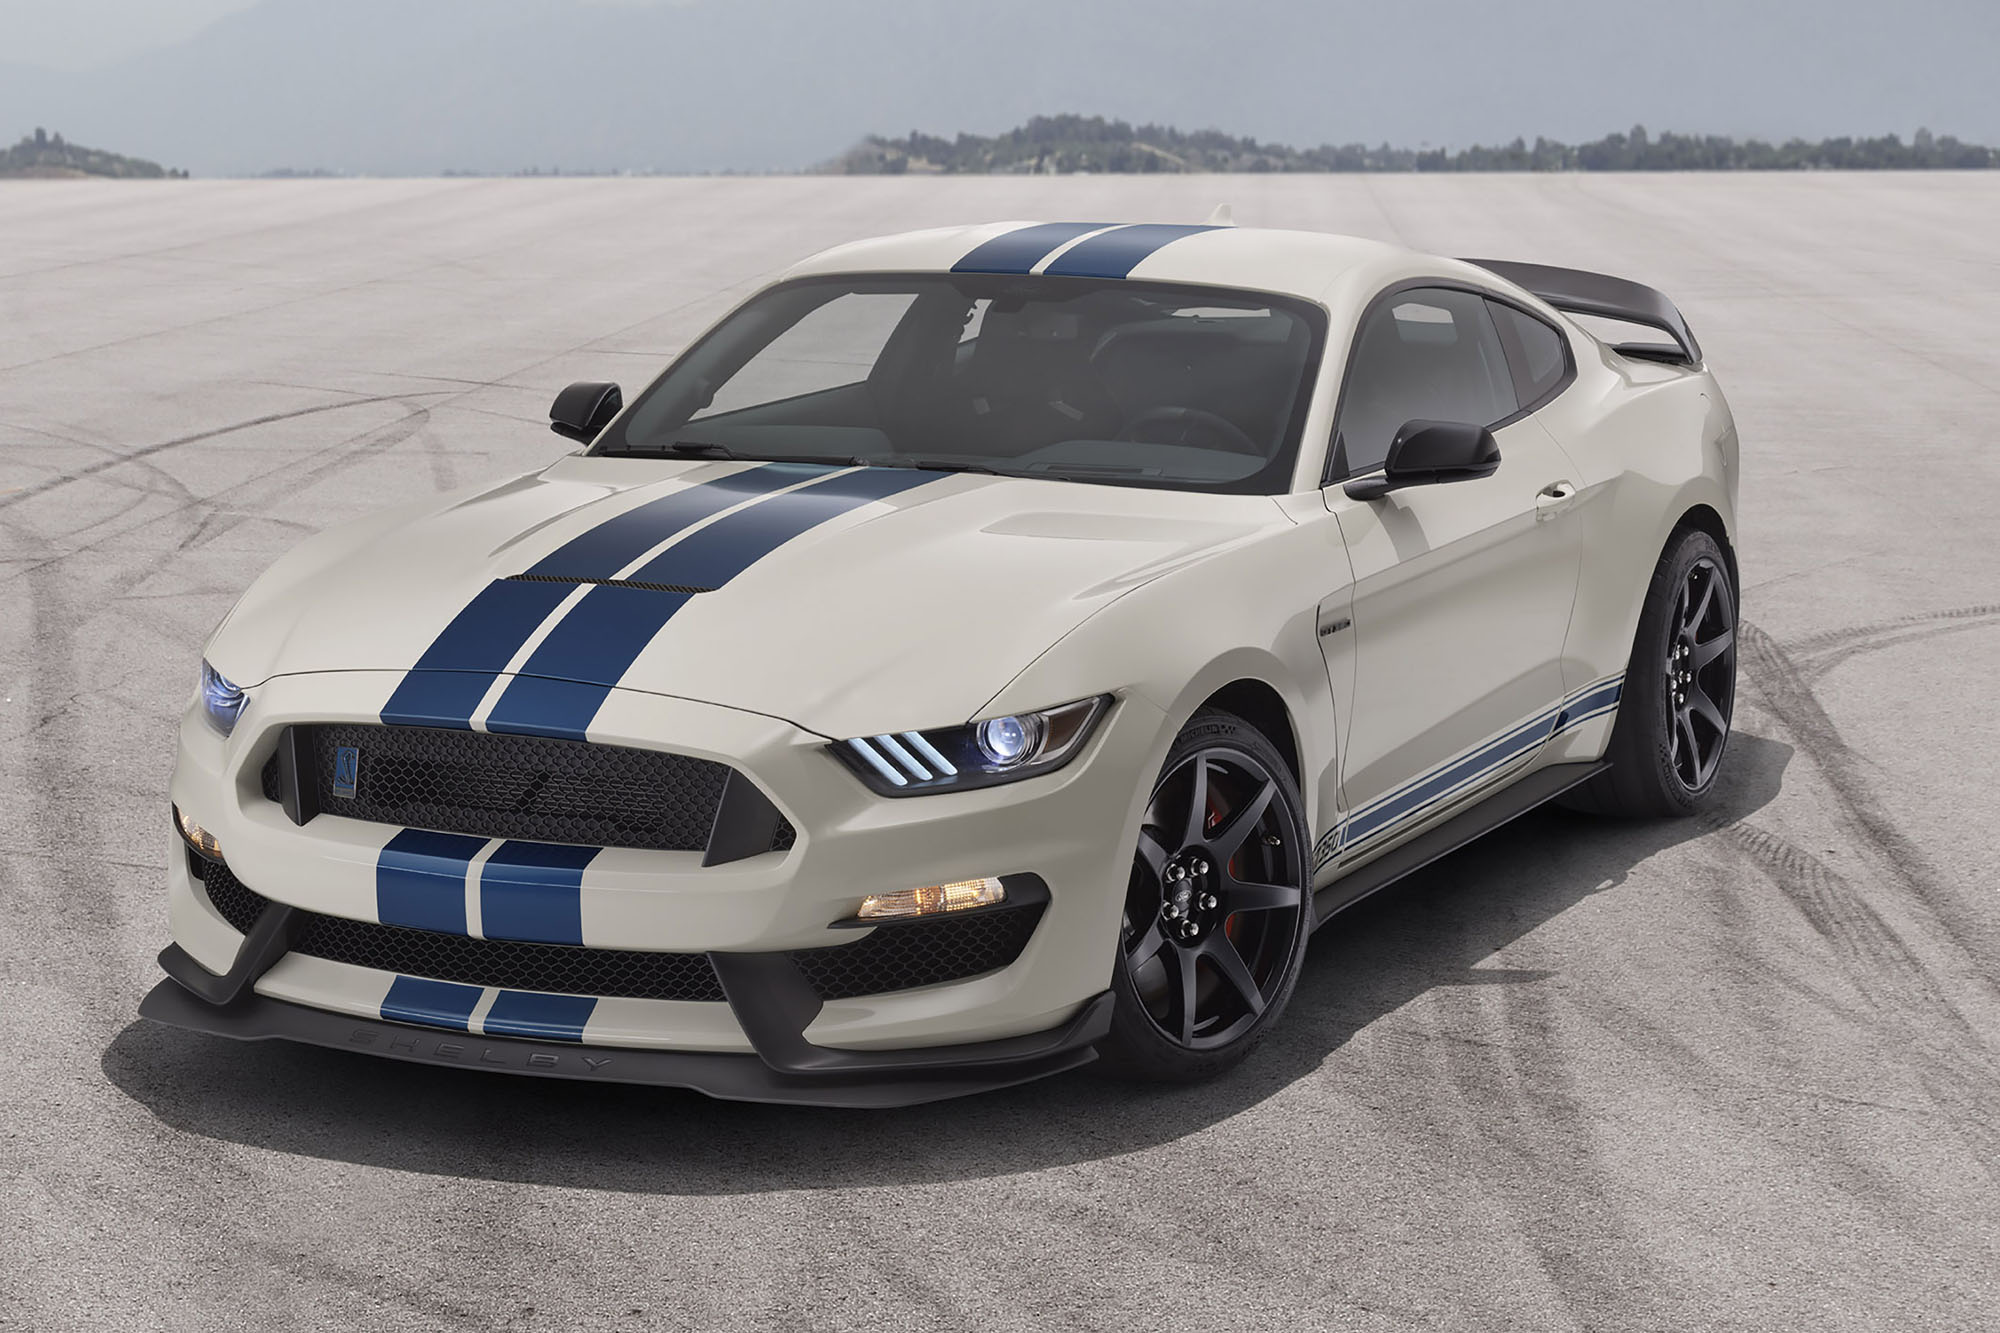 Front left quarter view of a blue and white 2020 Mustang Shelby GT350 on a skidpad